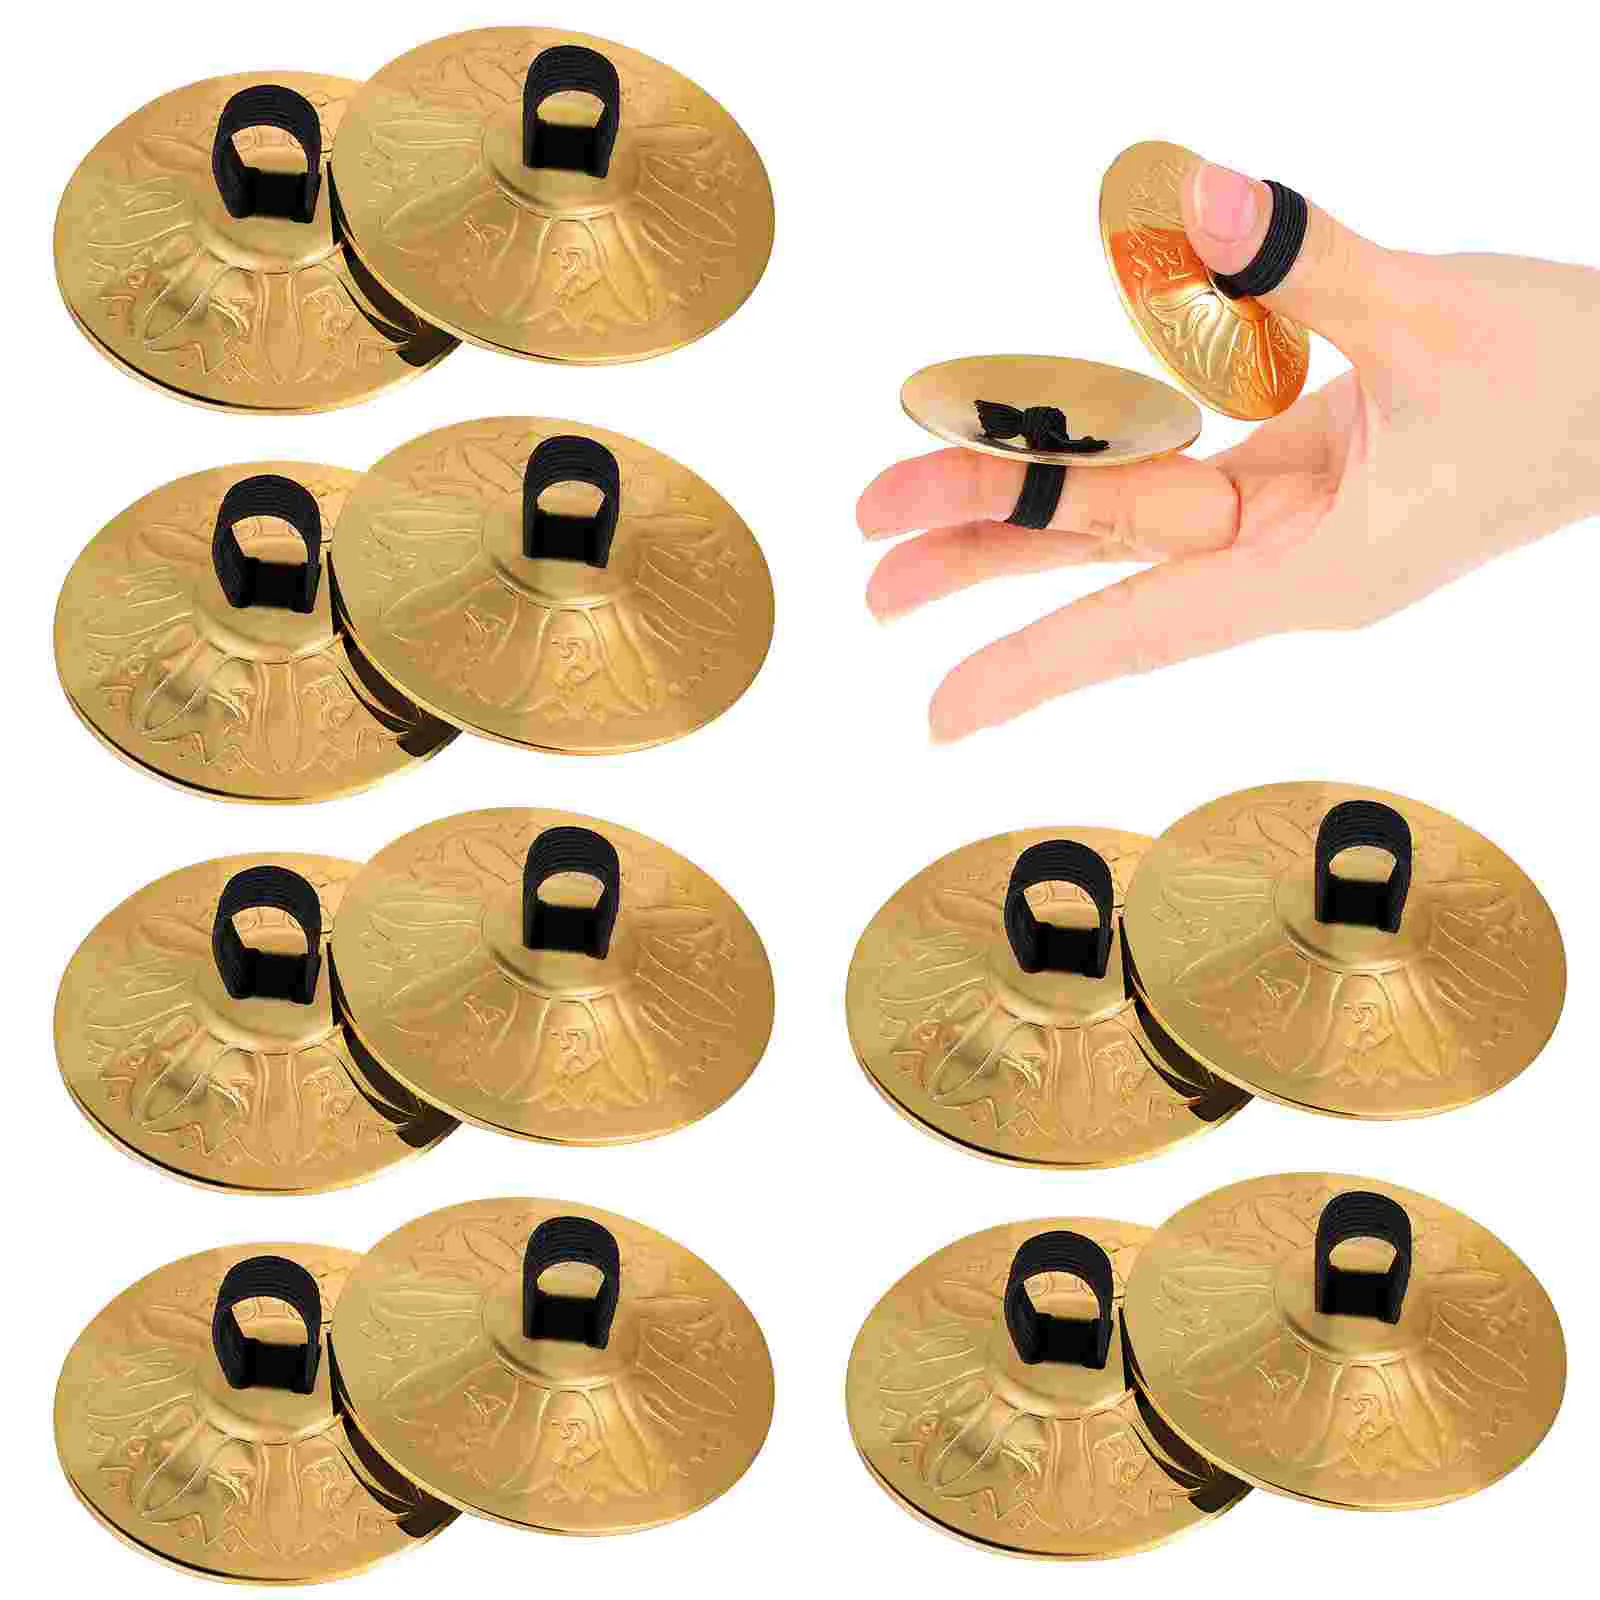 

Copper Finger Cymbals Small Finger Cymbals Belly Dancing Mini Cymbals Musical Instrument Saucers